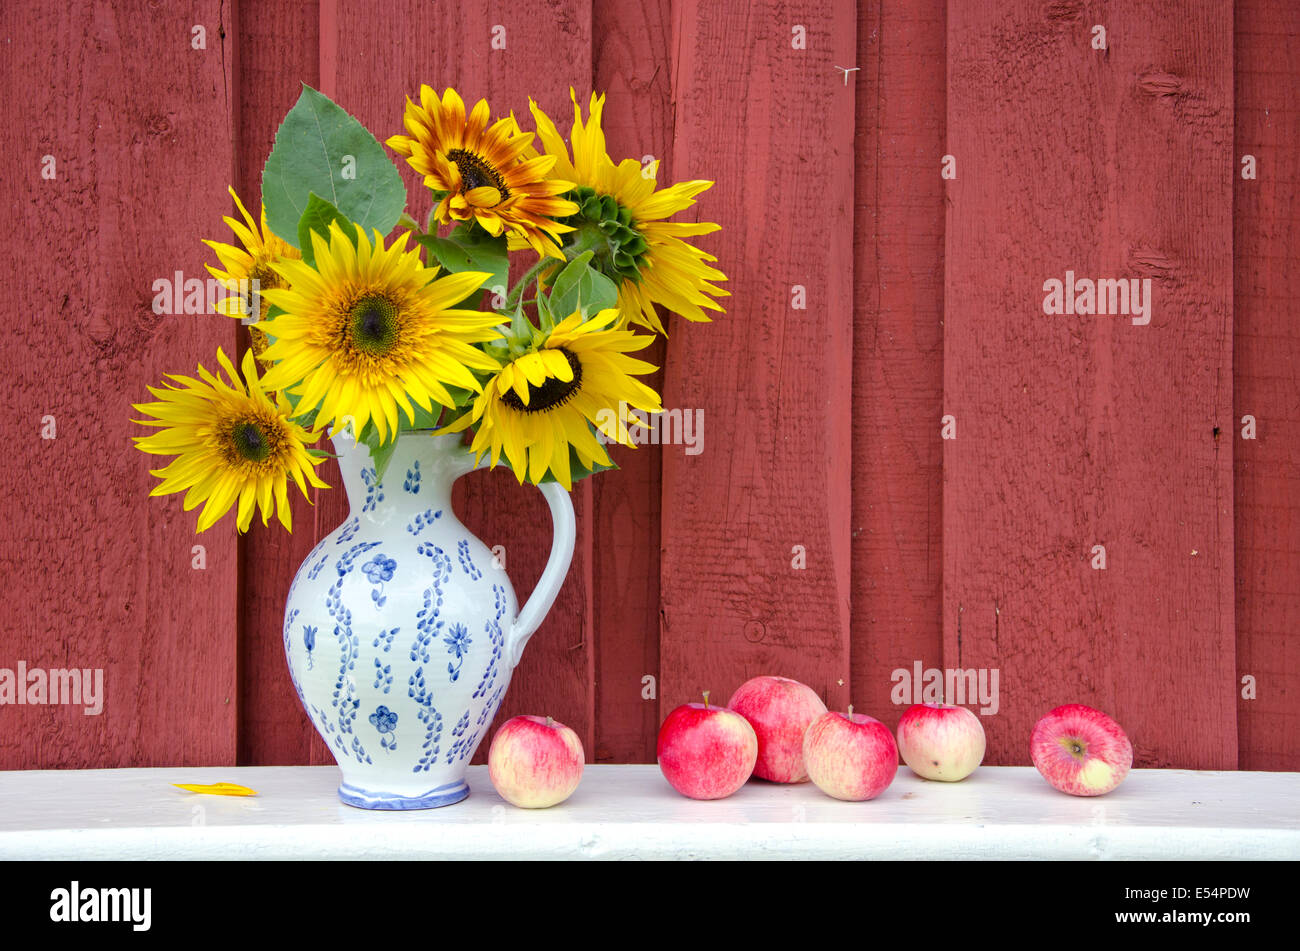 decorative ceramic jug pitcher with beautiful sunflowers and fresh ripe apples. Summer end still-life Stock Photo